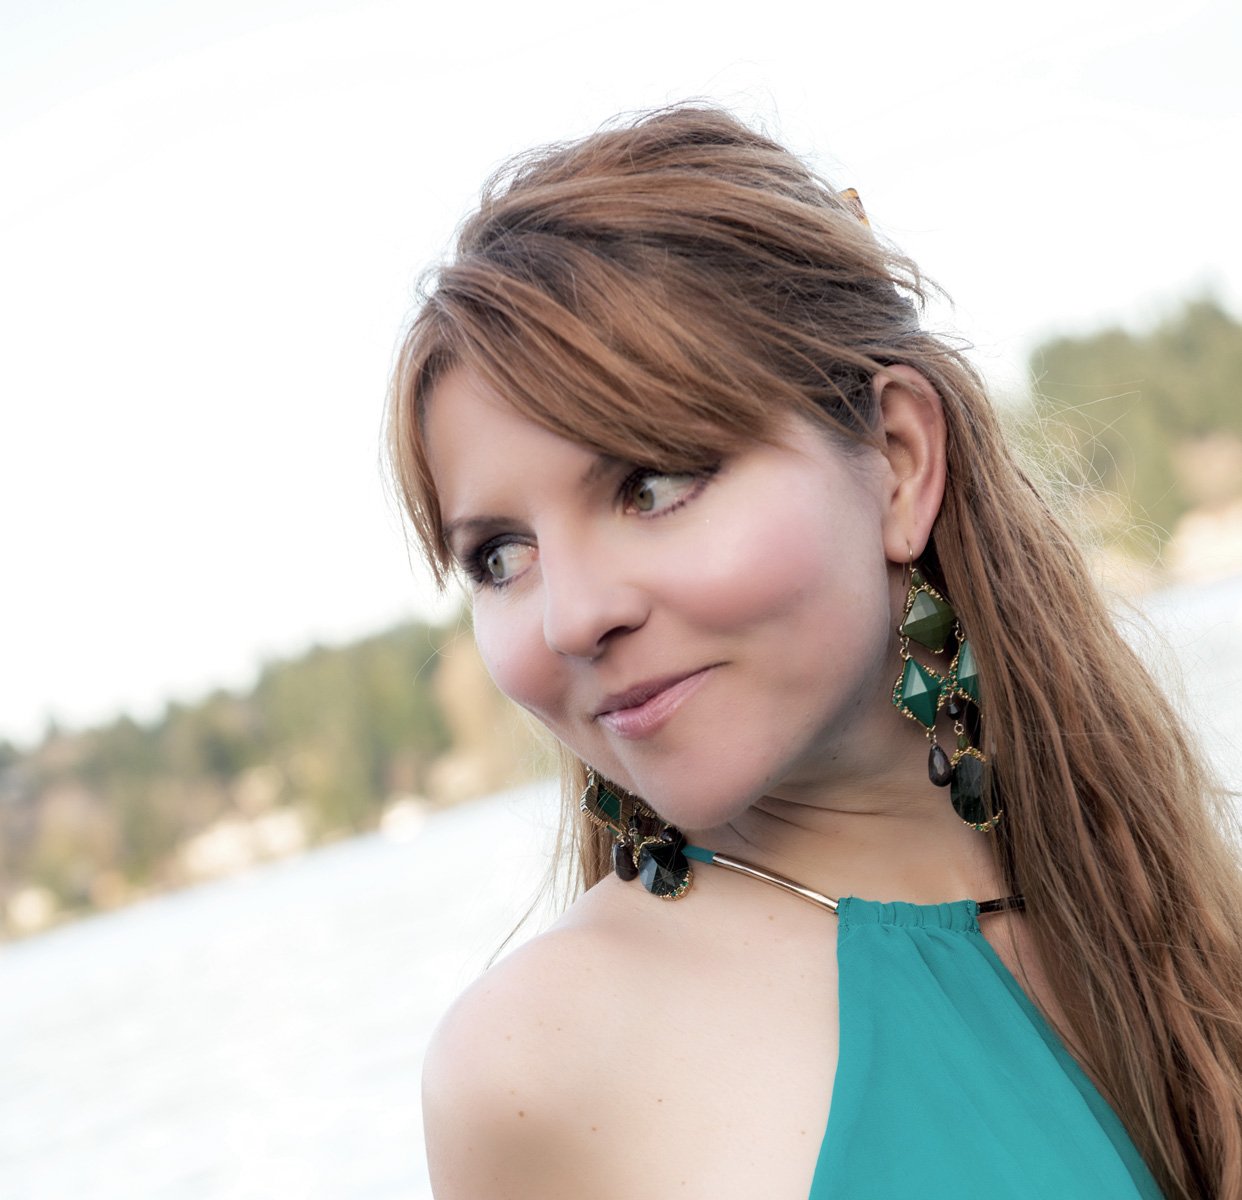 Vocalist Sarah Shea will stir some jazz into her Christmas songs at Sequim's Wind Rose Cellars on Saturday. Shawn McGrath